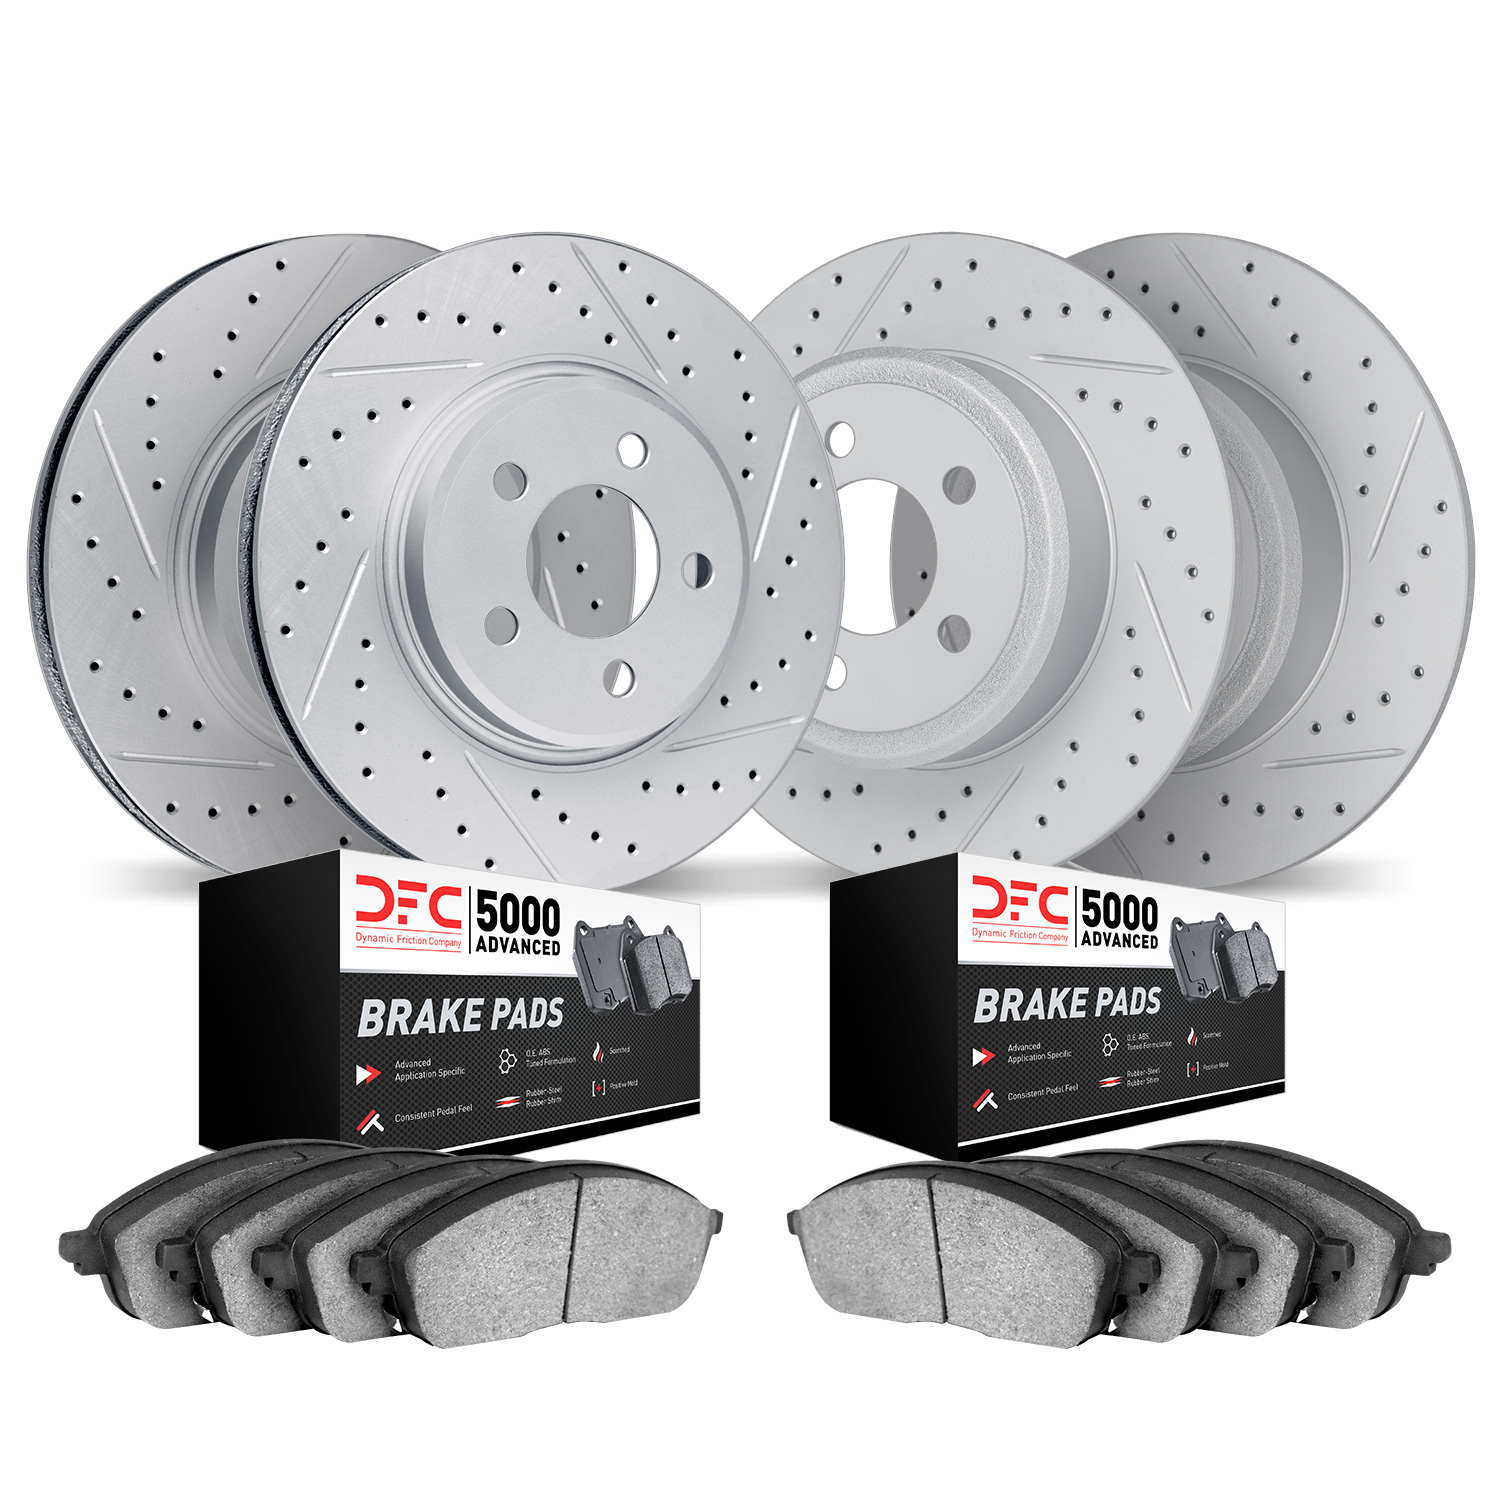 2504-76088 Geoperformance Drilled/Slotted Rotors w/5000 Advanced Brake Pads Kit, 2002-2006 Lexus/Toyota/Scion, Position: Front a